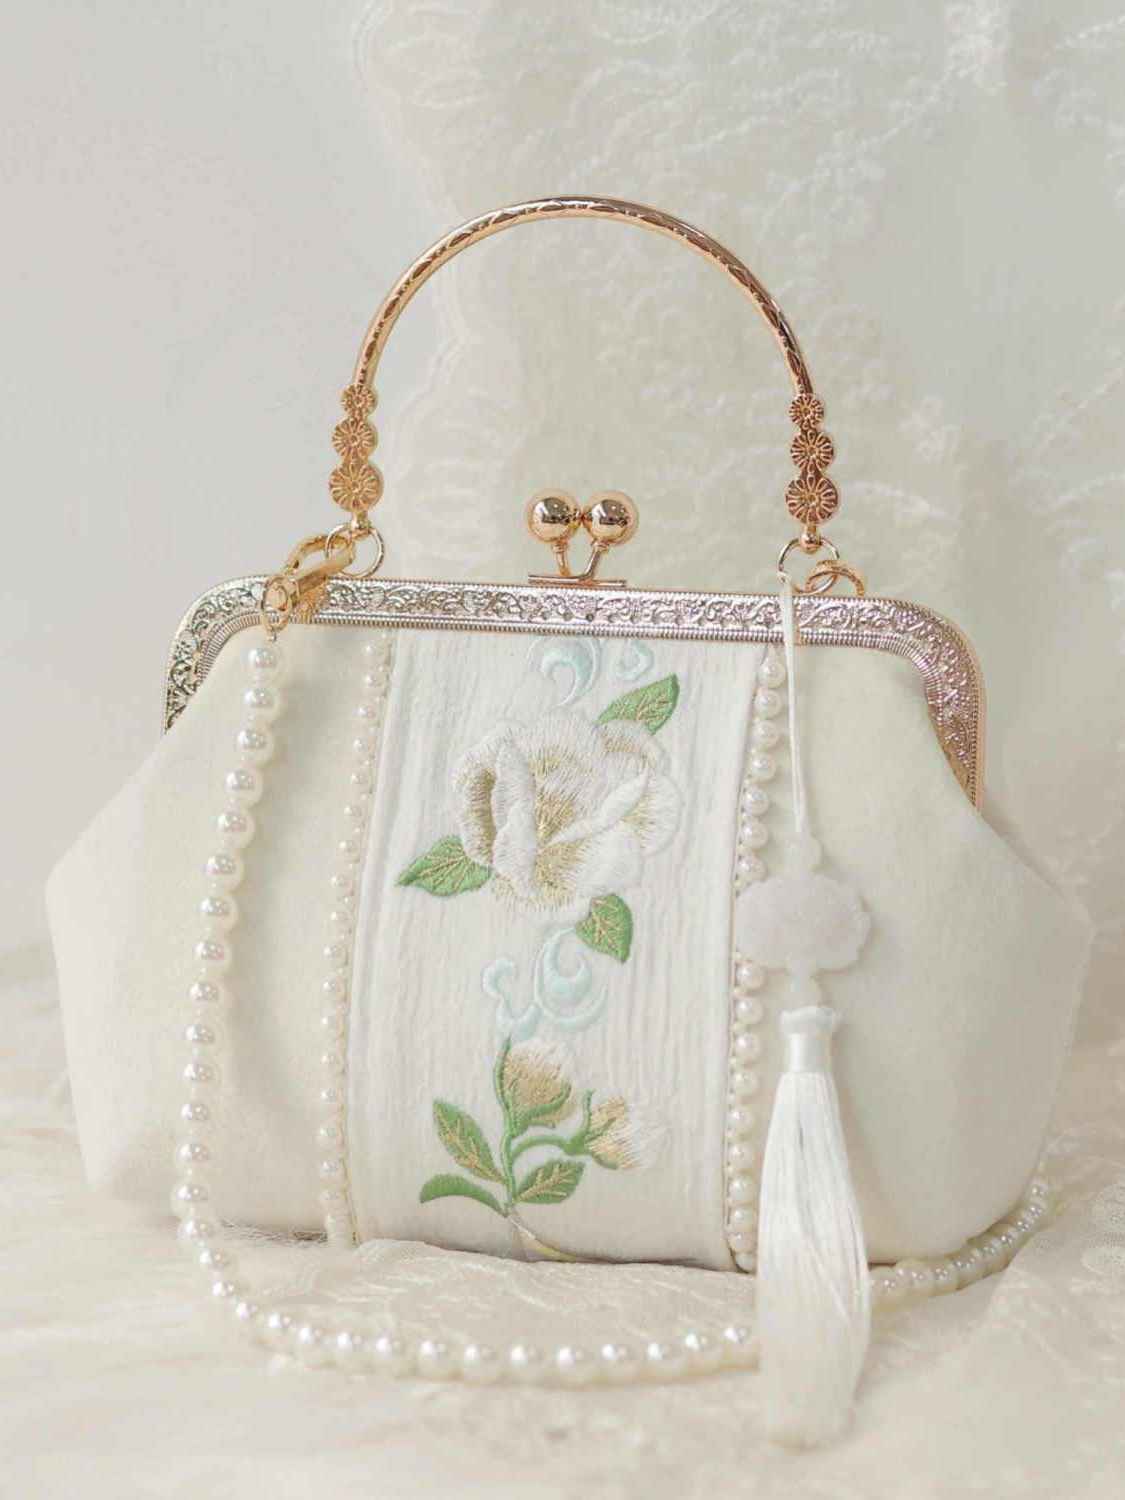 White Handmade Embobridery Bag Handmade Embroidery Hanfu/Qipao Cheongsam Bag - Elegant and Practical Accessory with Intricate Traditional Chinese Designs for Fashion-Forward Women - Shop Now